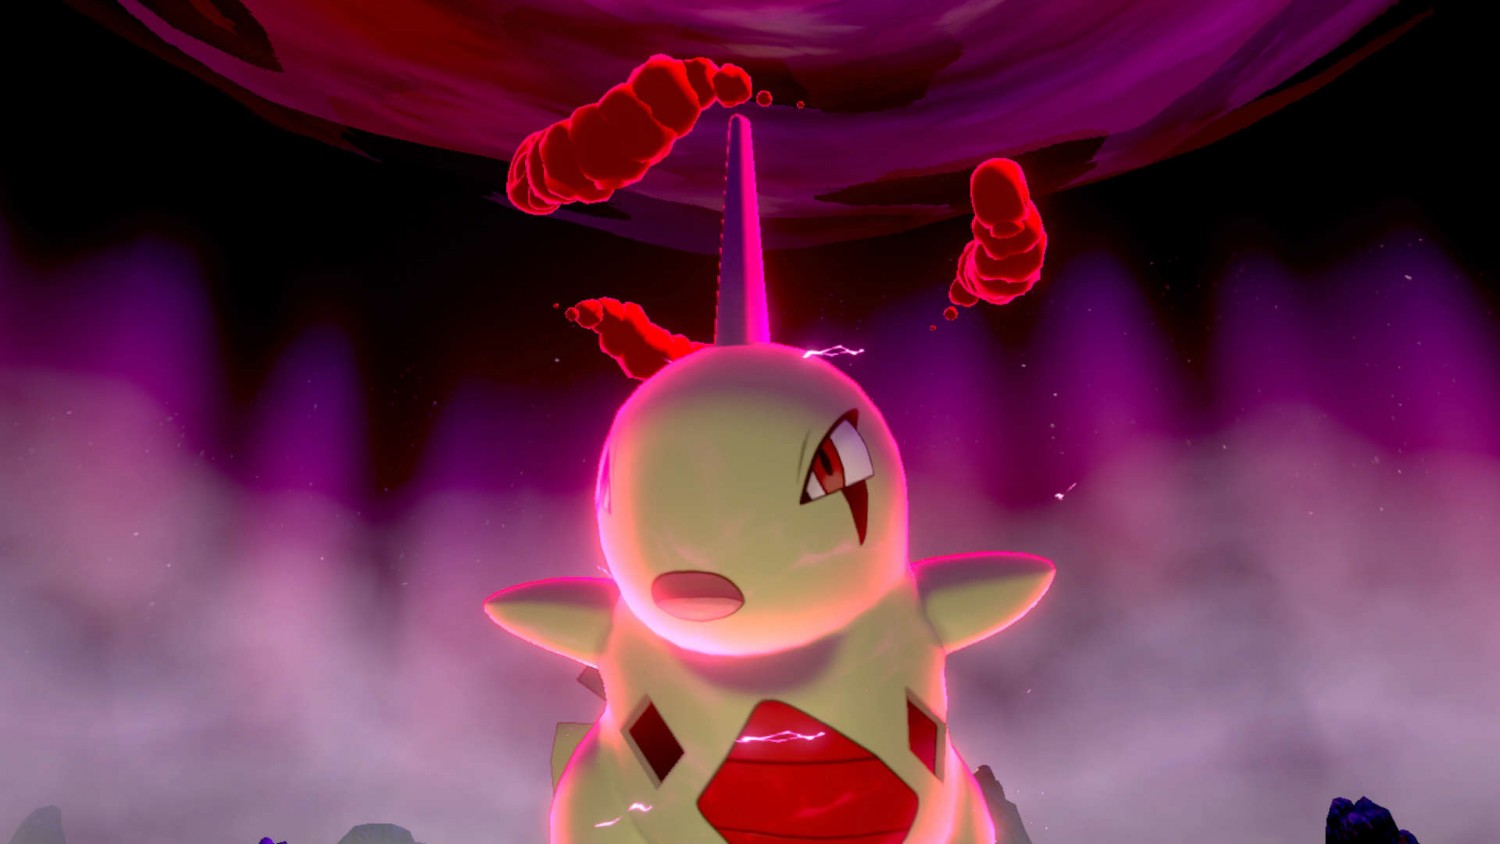 The Pokemon Sword And Shield Double Pack Features Dynamax Larvitar Jangmo O As Exclusives Geek Culture